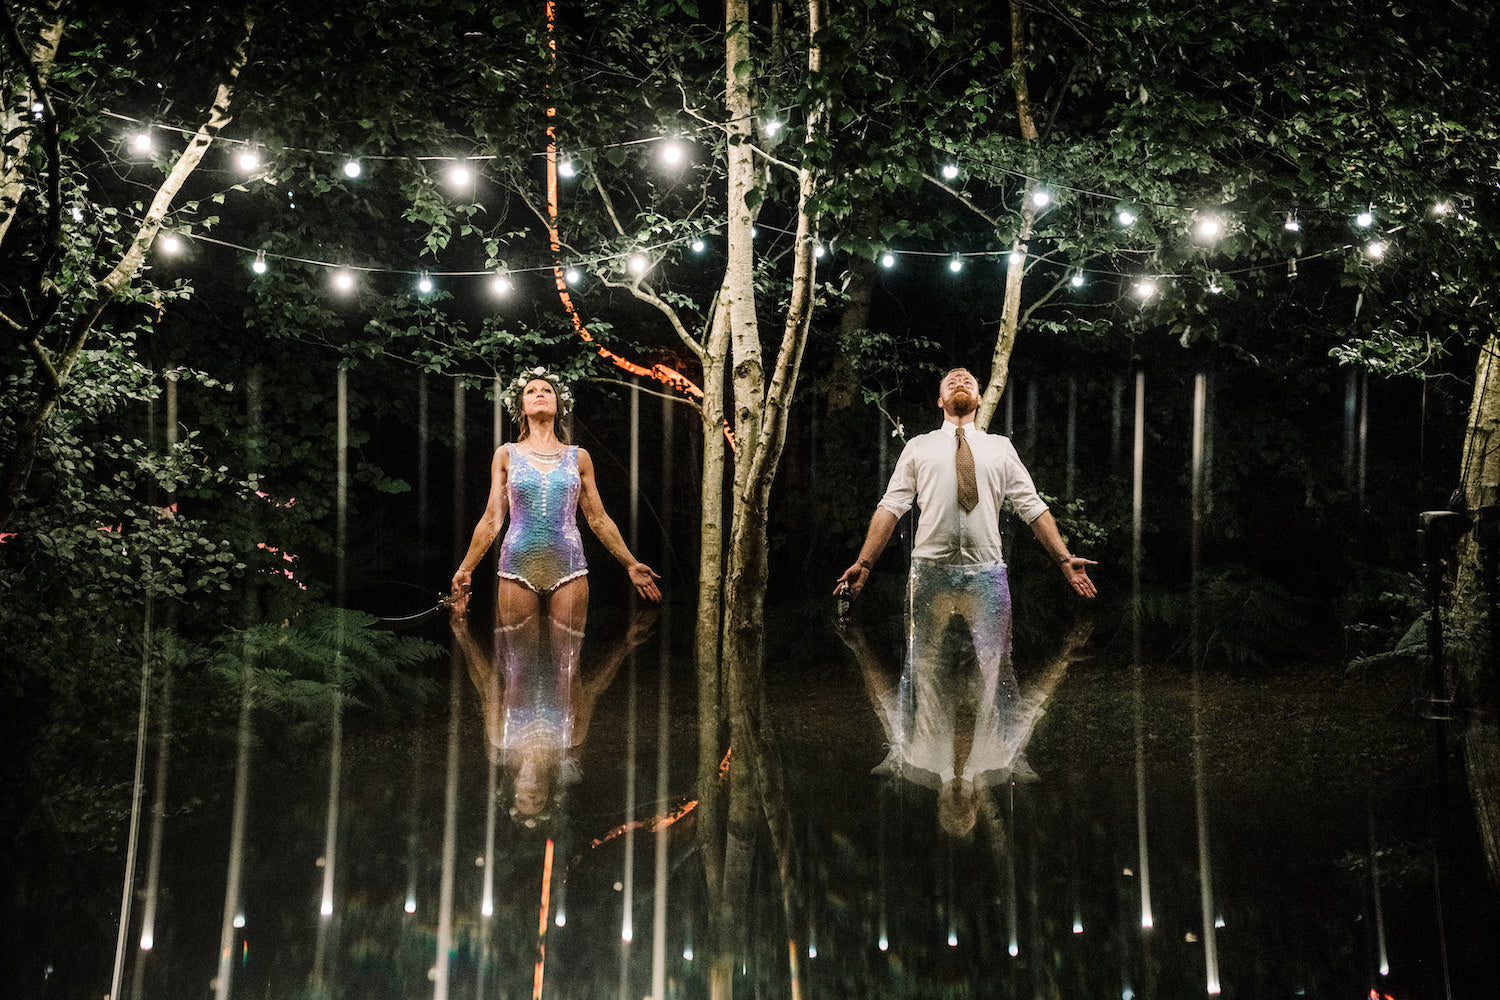 Bride and Groom wearing matching white sequin outfits stand with their arms open under fairy lights.